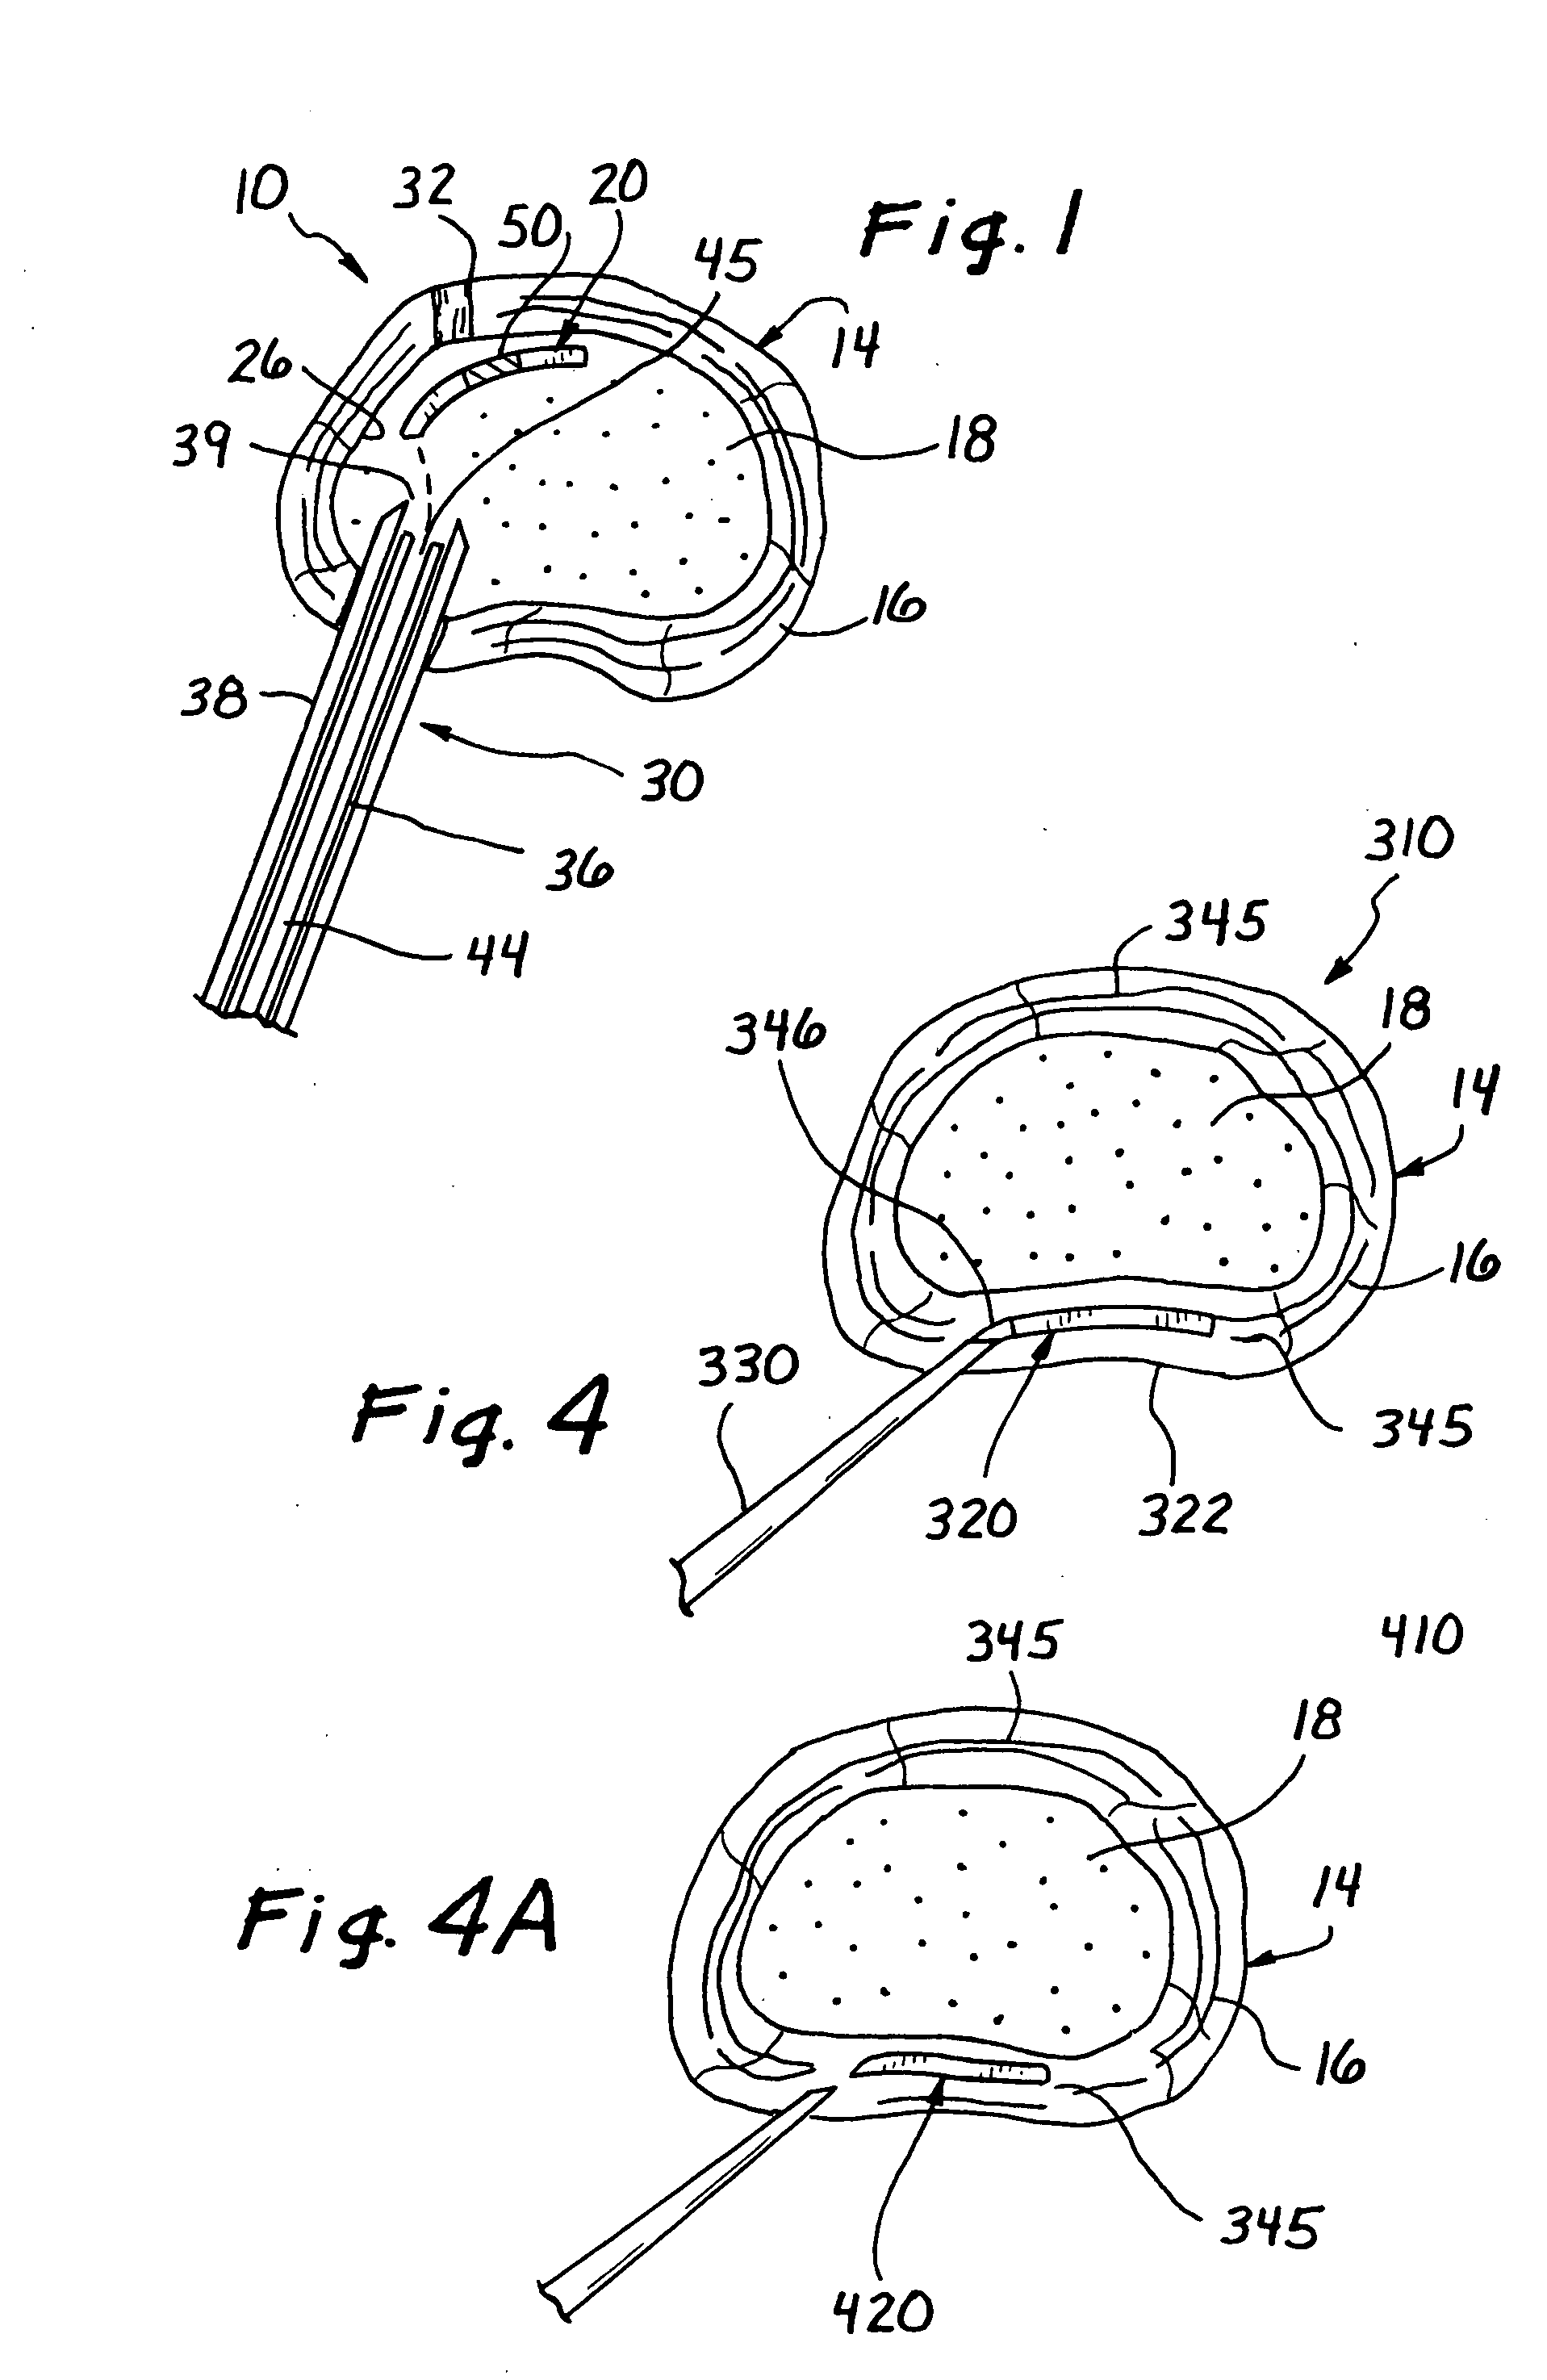 Spinal disc therapy system